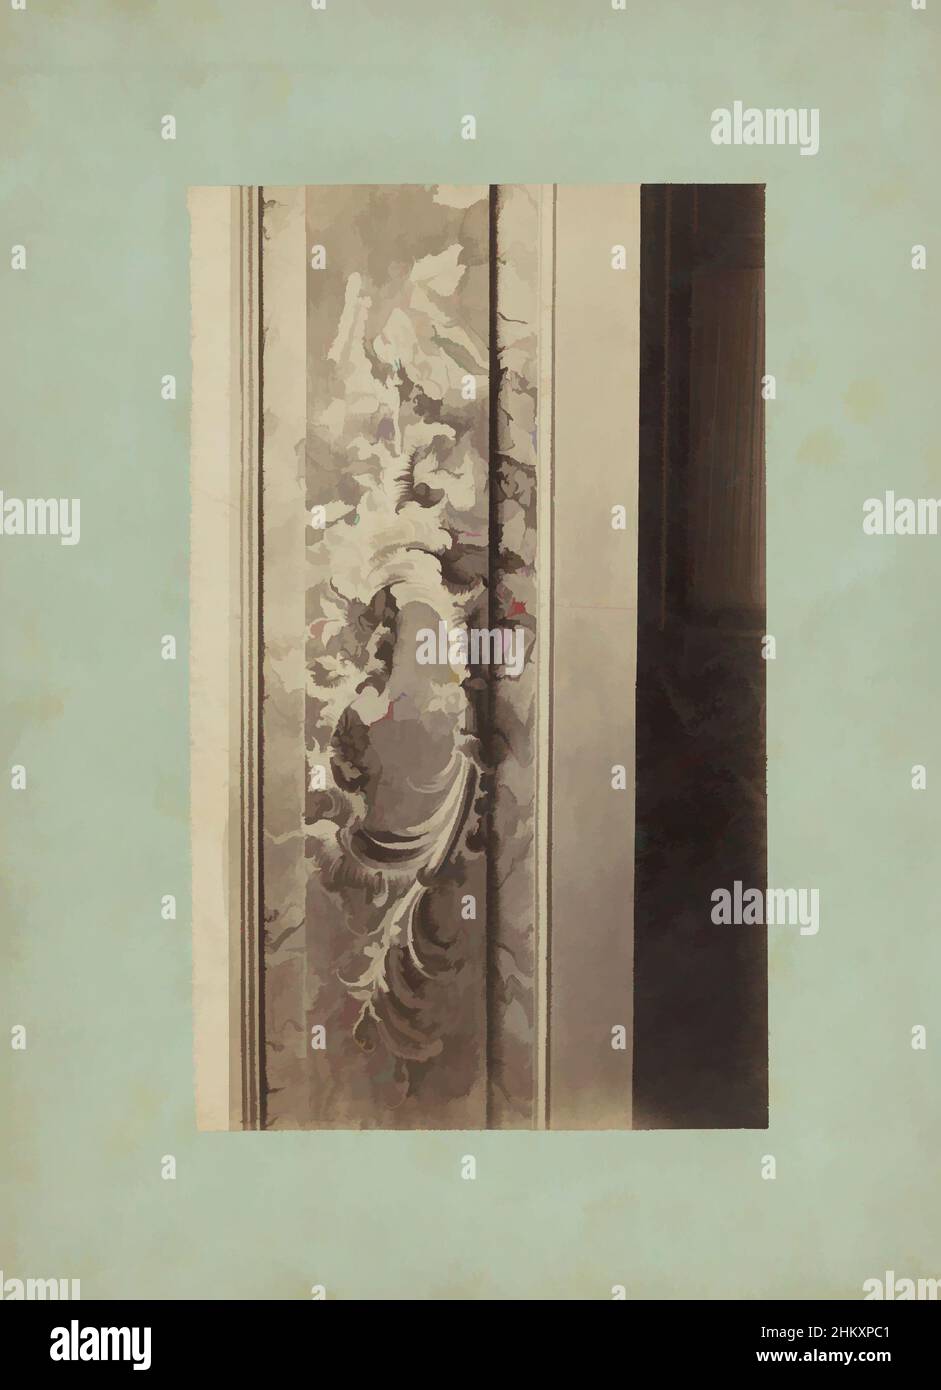 Art inspired by Ornament (presumably) on a wall, c. 1875 - c. 1900, cardboard, albumen print, height 209 mm × width 127 mm, Classic works modernized by Artotop with a splash of modernity. Shapes, color and value, eye-catching visual impact on art. Emotions through freedom of artworks in a contemporary way. A timeless message pursuing a wildly creative new direction. Artists turning to the digital medium and creating the Artotop NFT Stock Photo